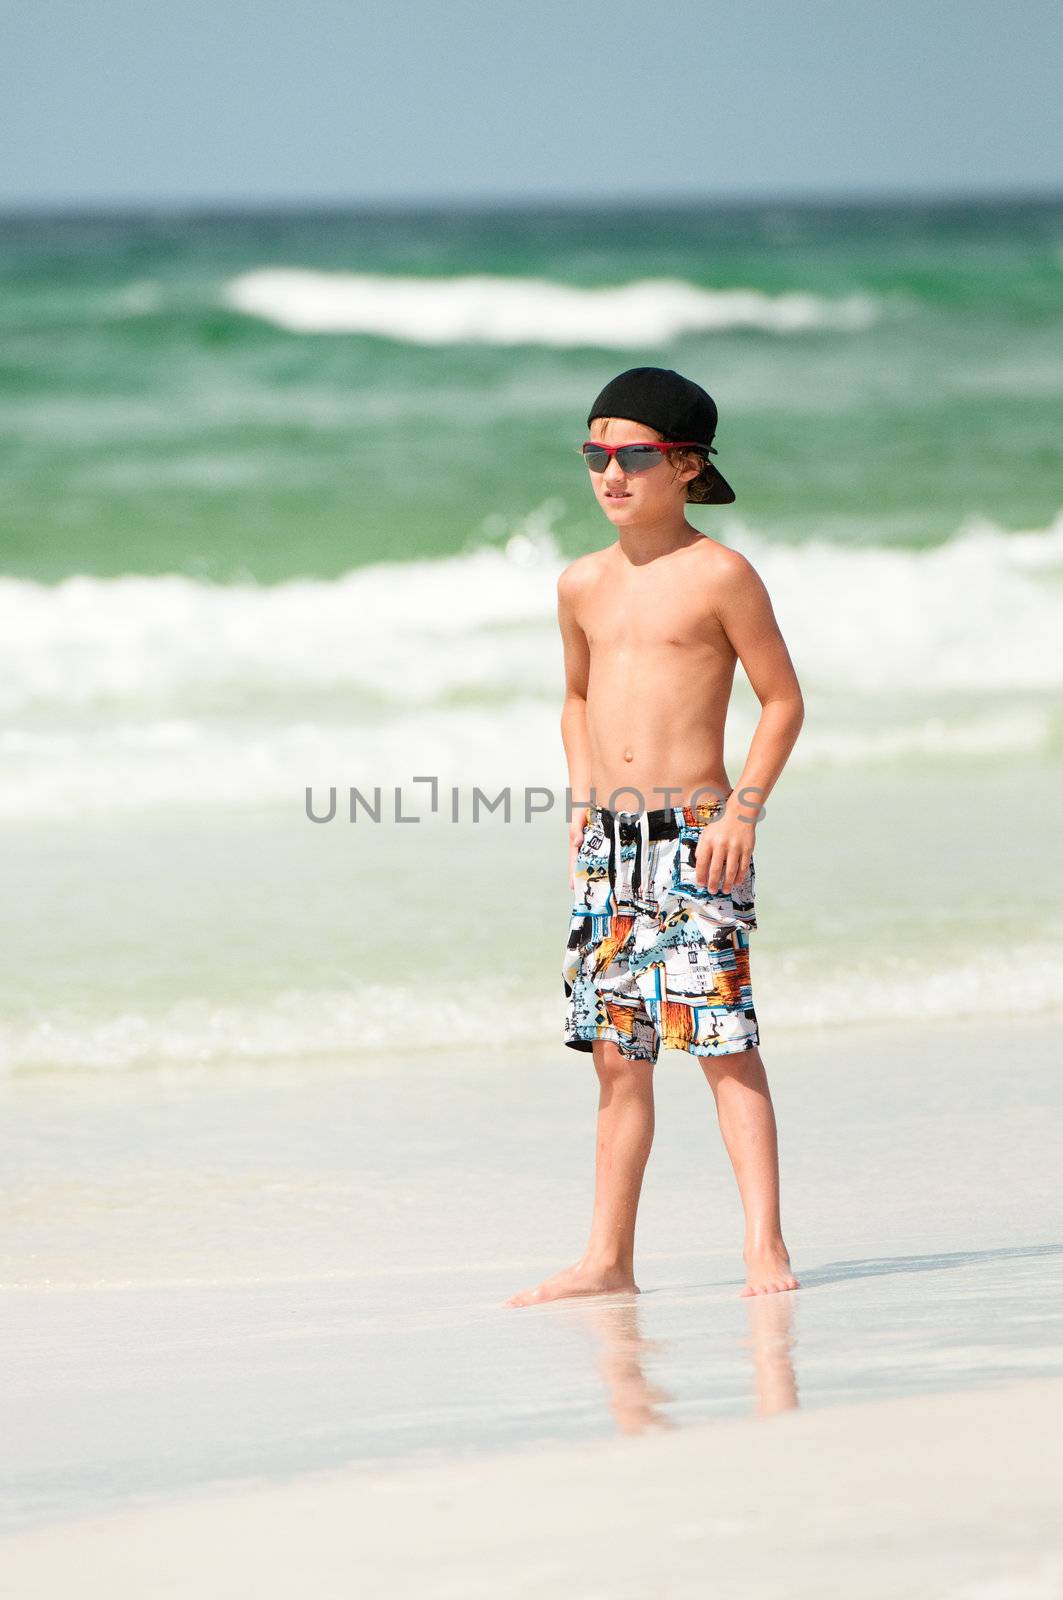 Young boy in Swim trunks at the beach with the ocean in the background.